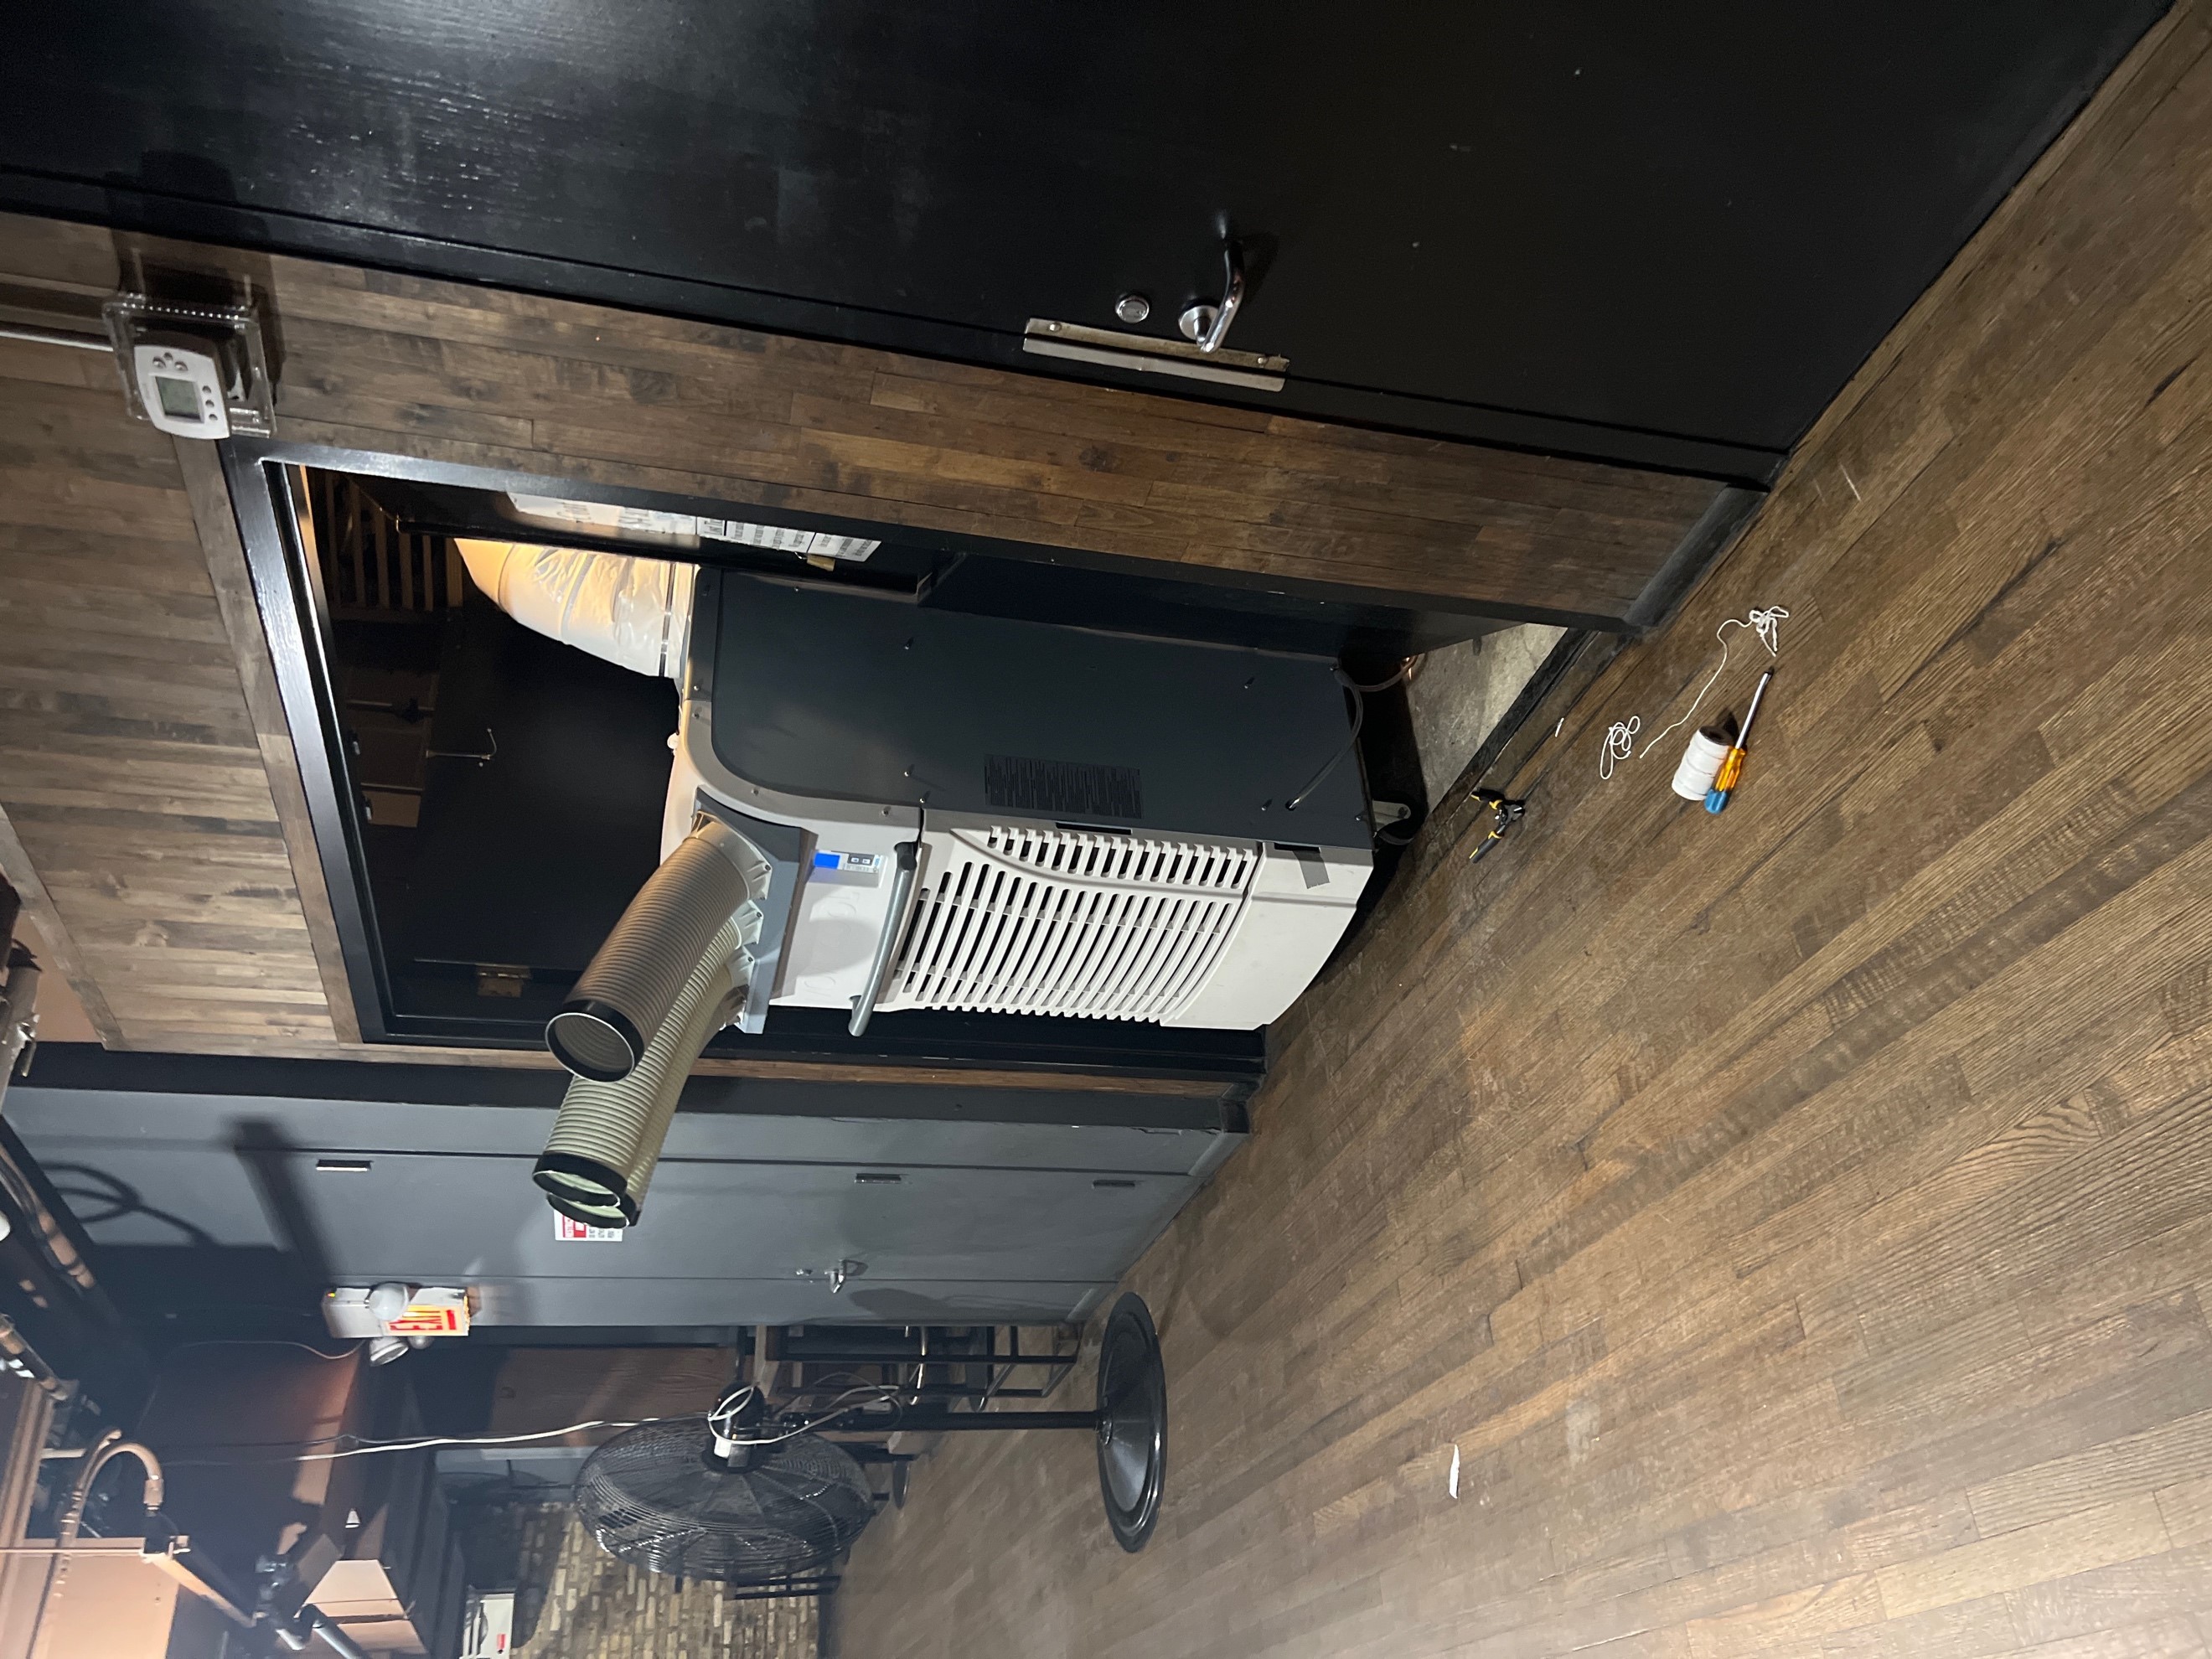 5-ton portable air-cooled unit straddling elevator door opening with cold air chutes pointed into the bar area.